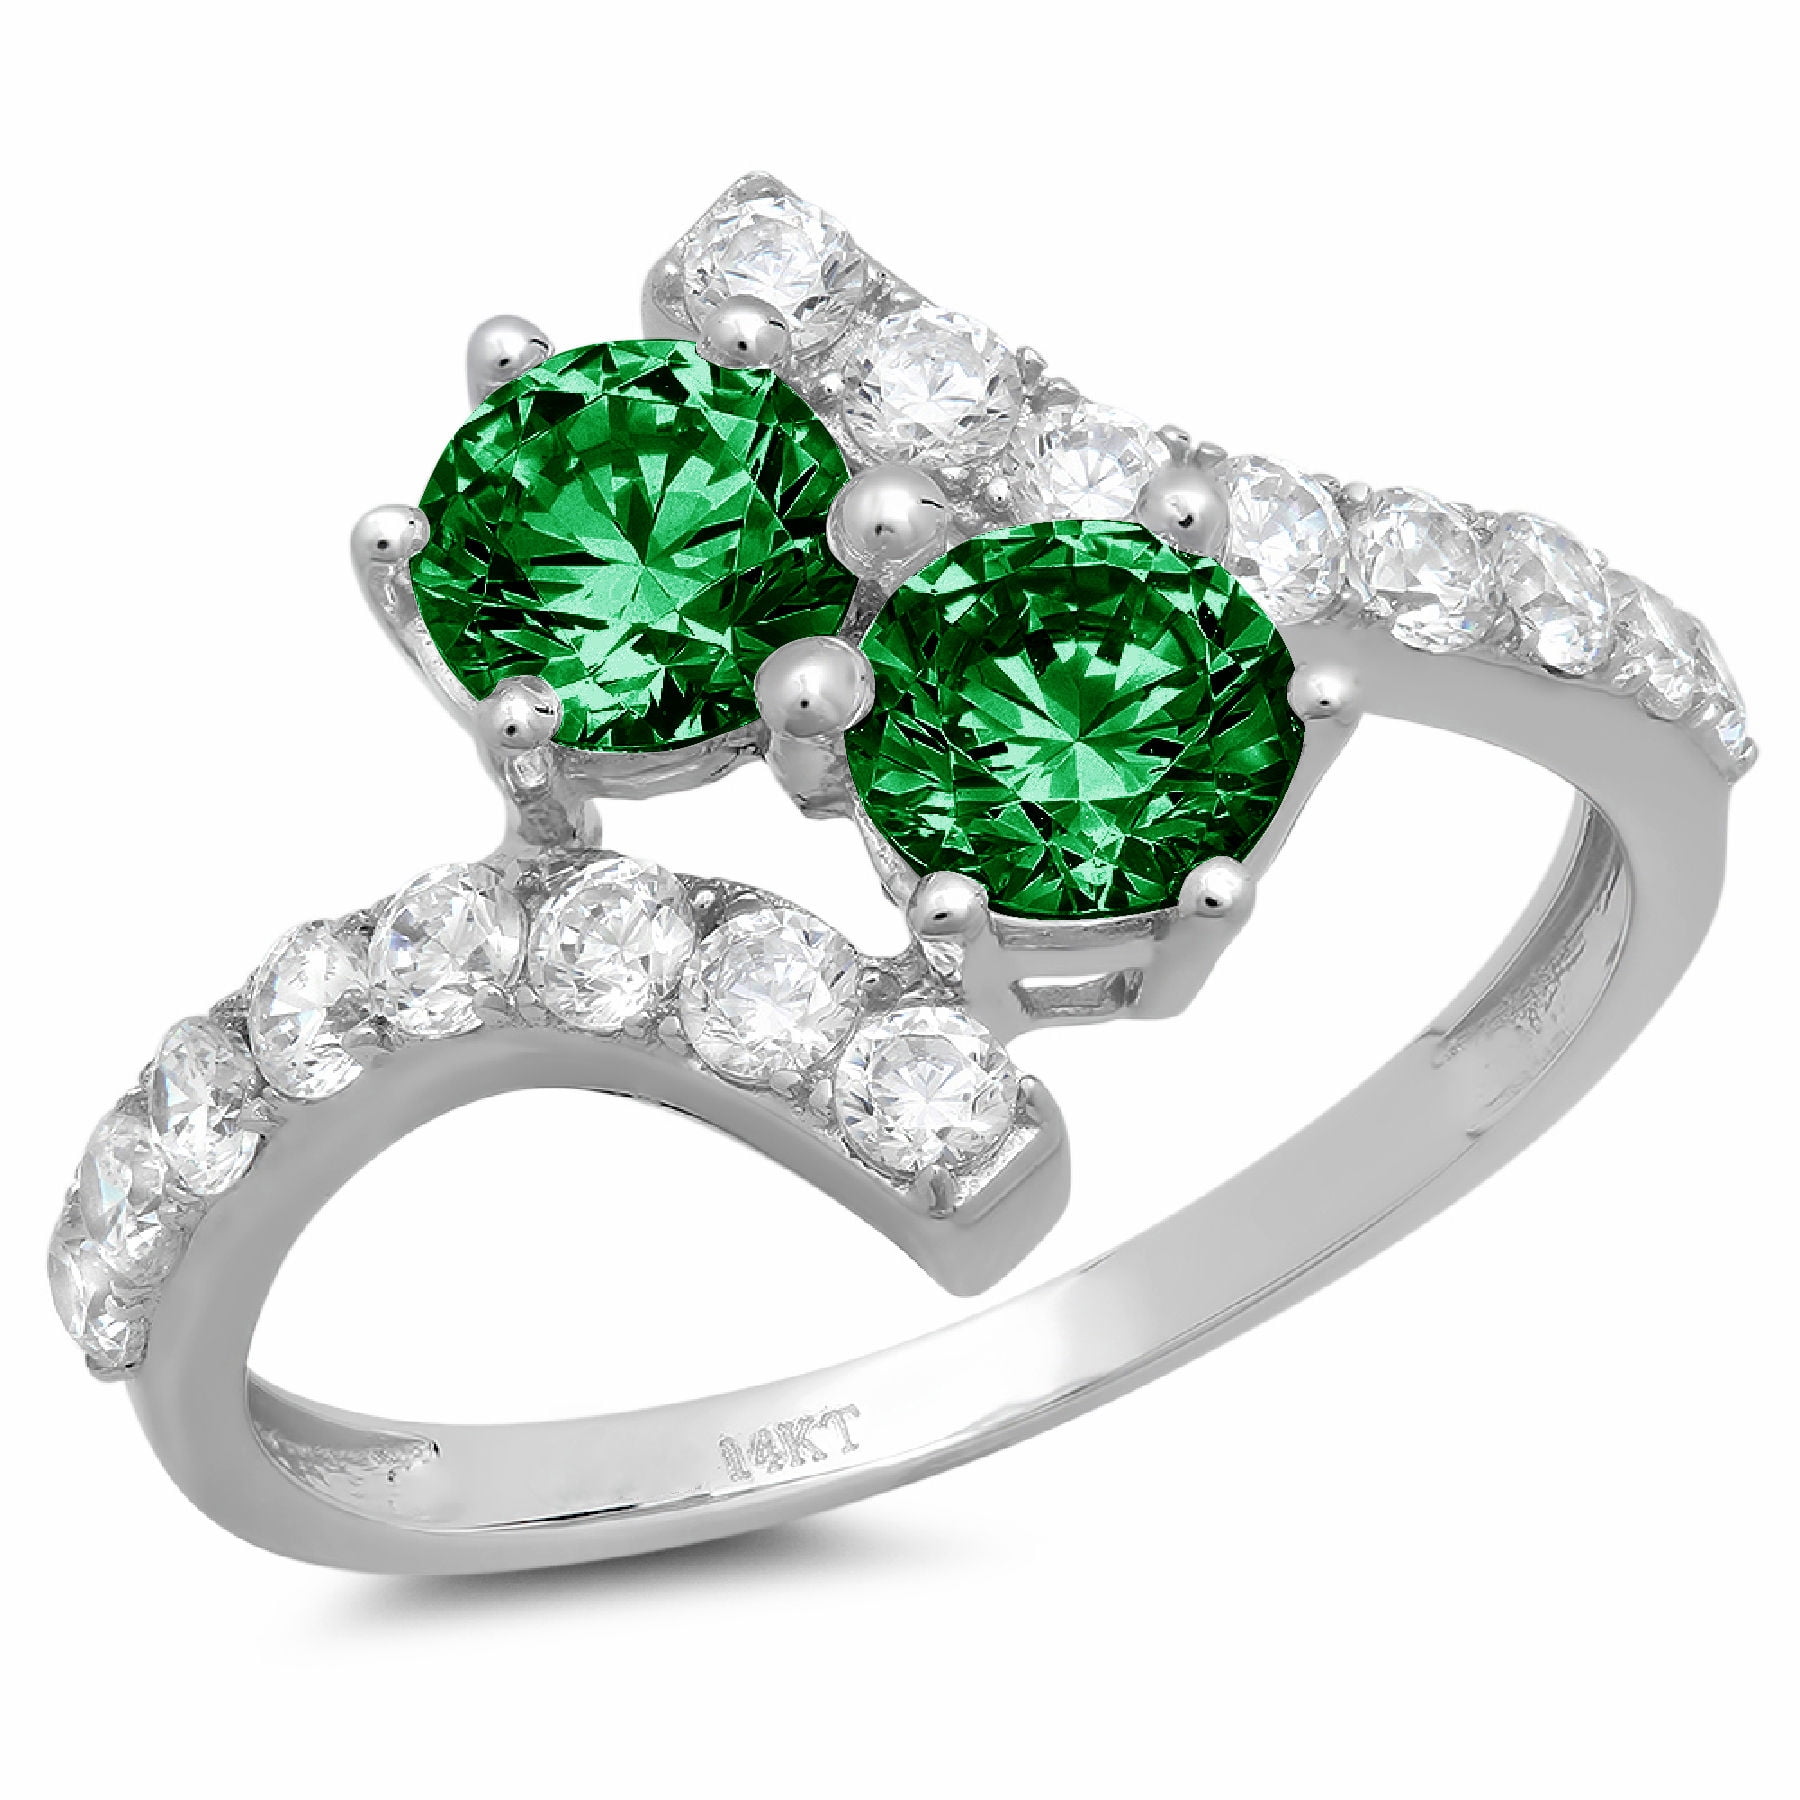 1.98 ct Brilliant Round Cut VVS1 Simulated Emerald Rose Solid 14k or 18k Gold Robotic Laser Engraved Handmade Solitaire with Accents Ring